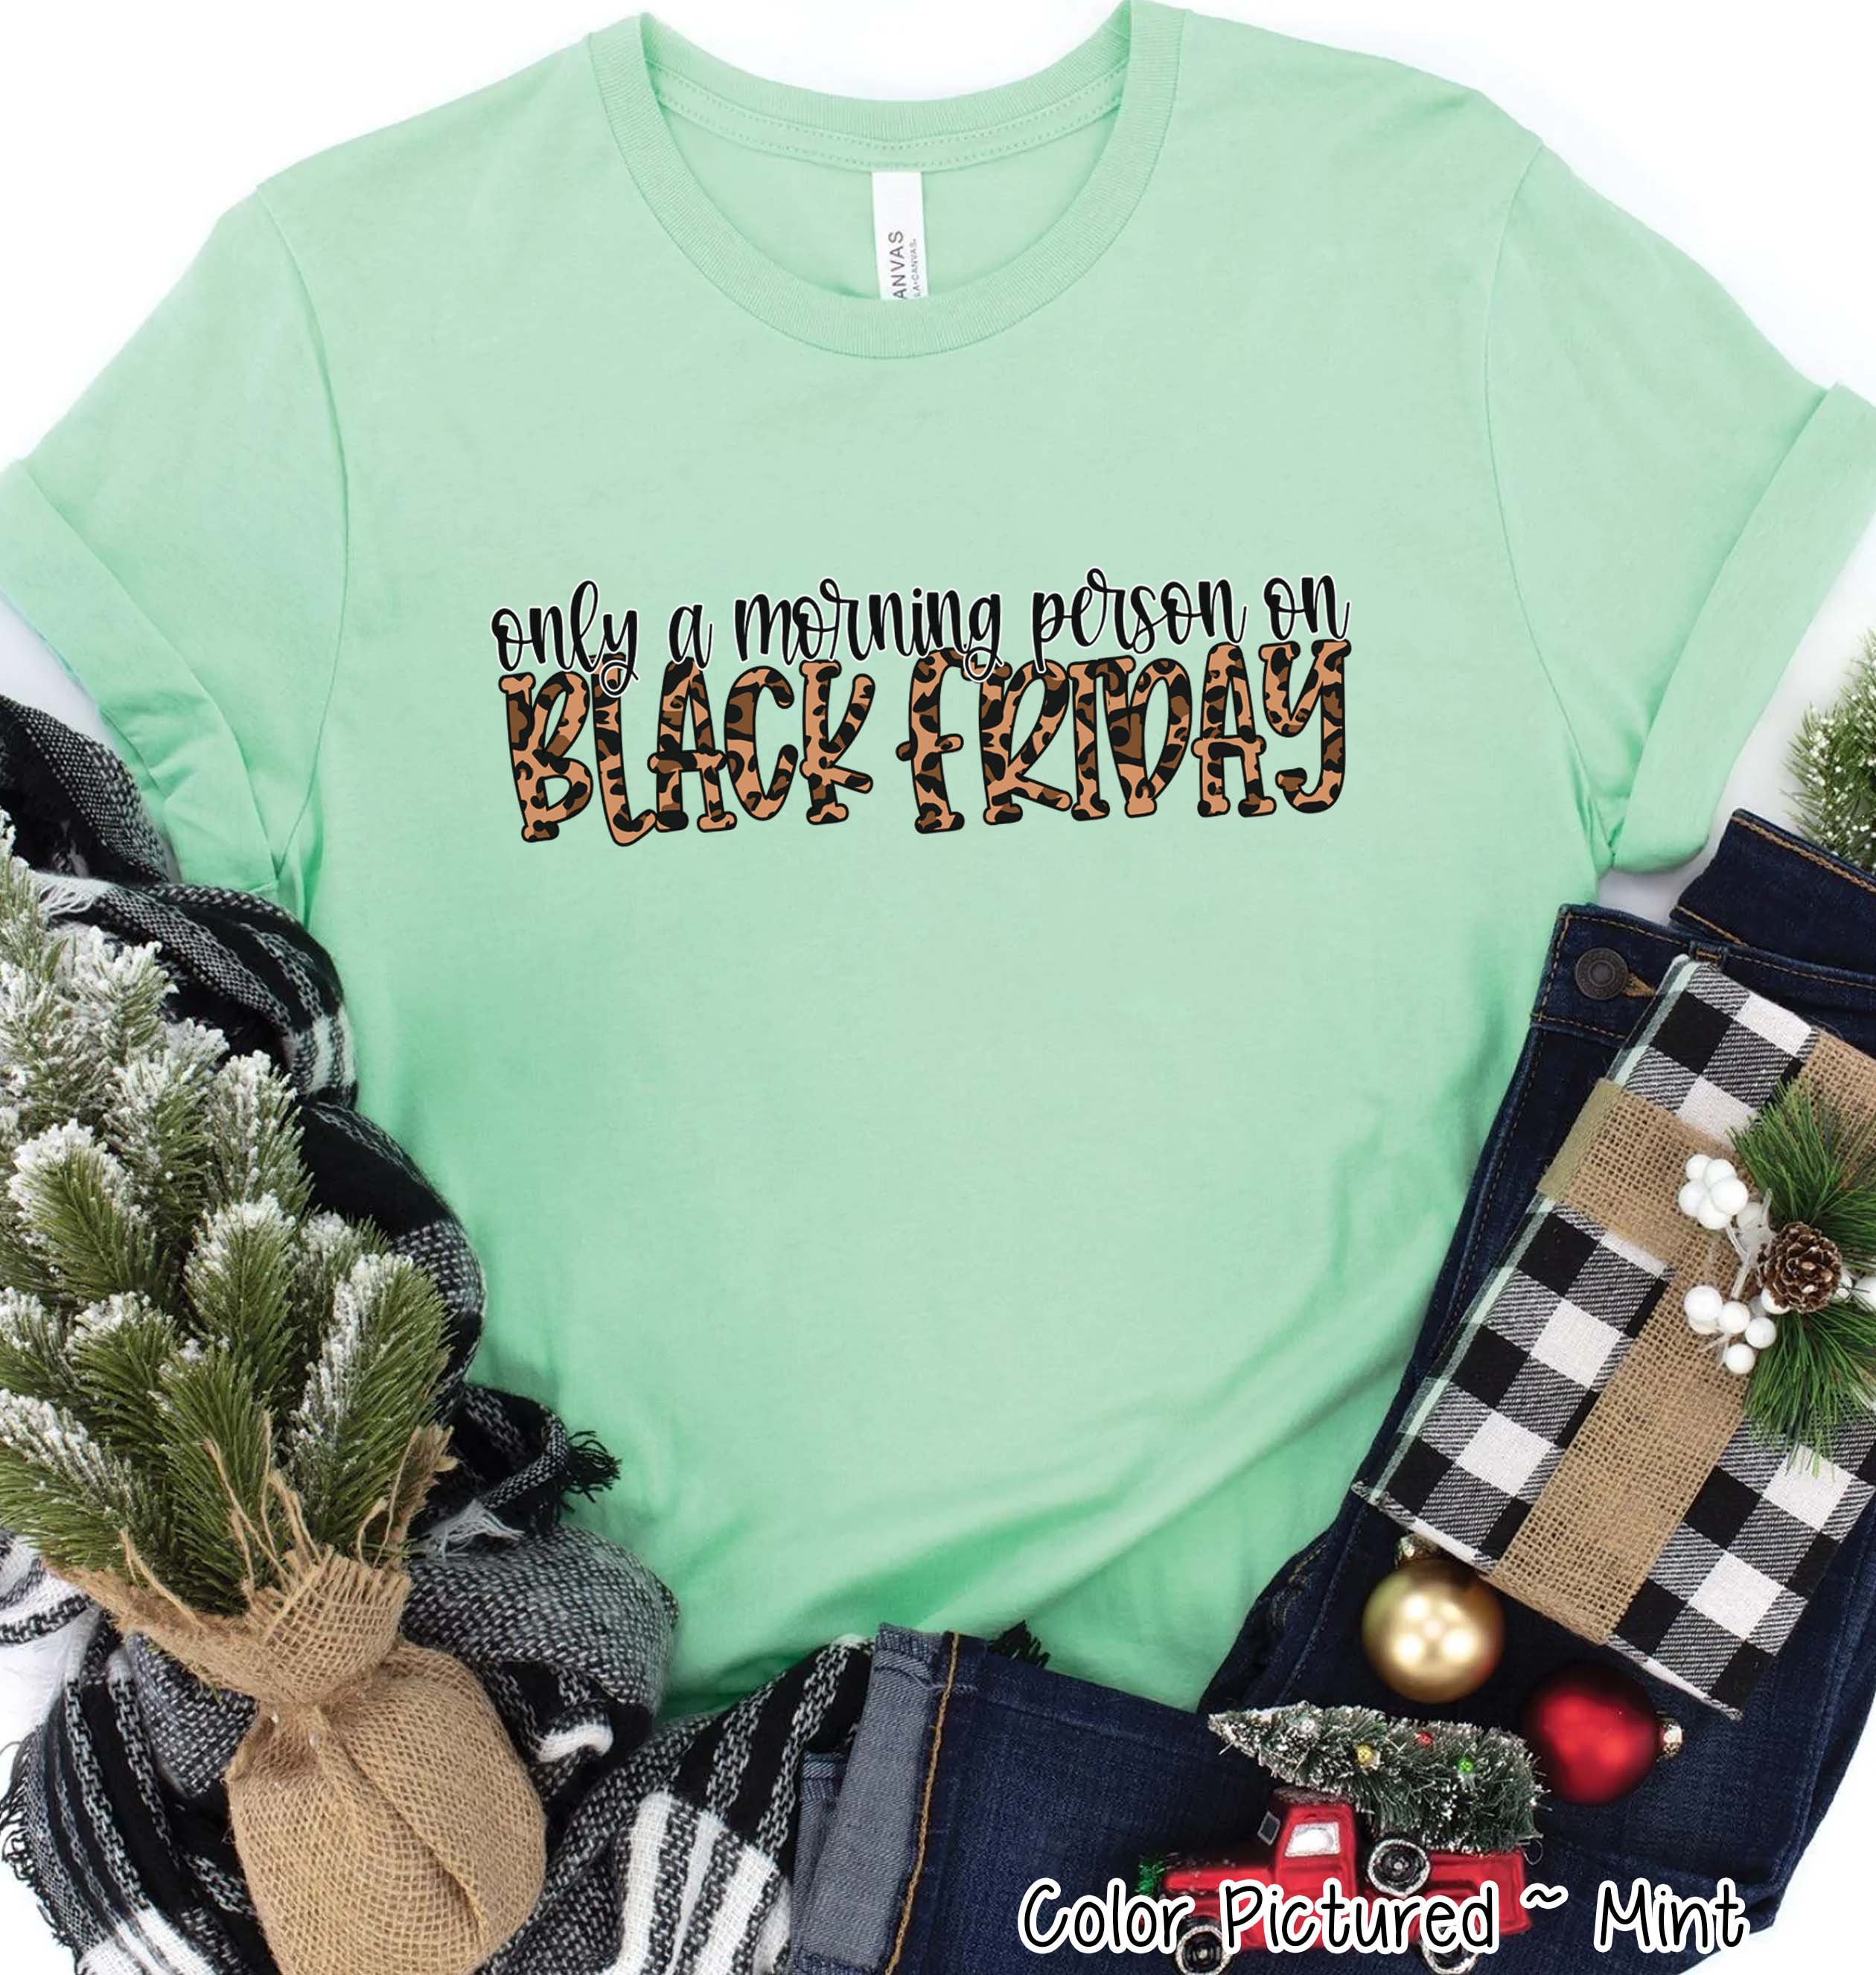 Only A Morning Person on Black Friday Funny Holiday Tee